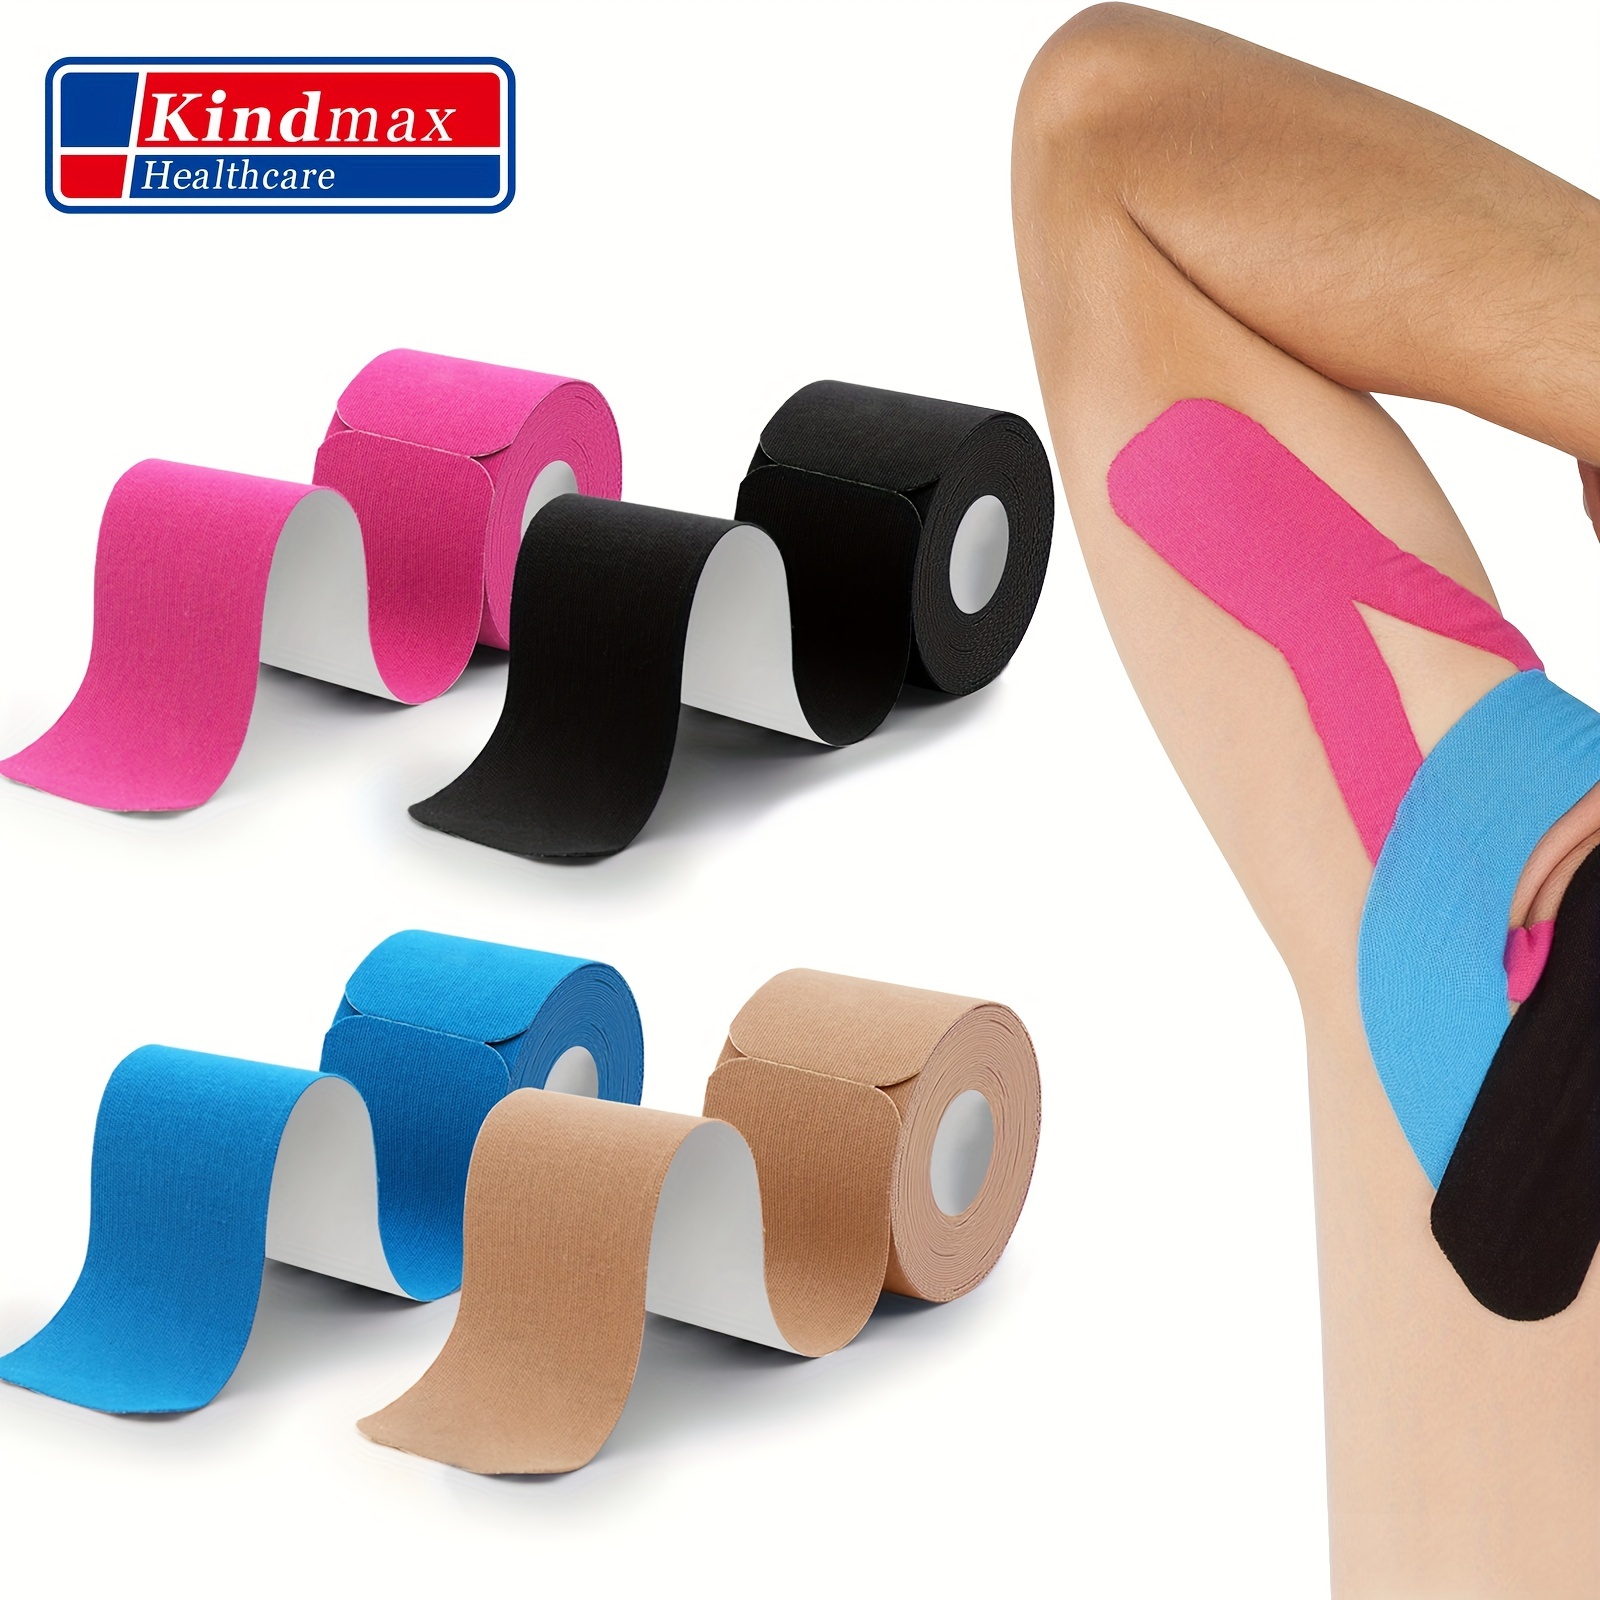  Kinesiology Tape 4 Rolls K Sports Tape for Knee Support and  Muscle Pain Relief, Uncut Physio Tape Elastic Therapeutic Designed for  Athletes Injury Recovery (Beige) : Health & Household